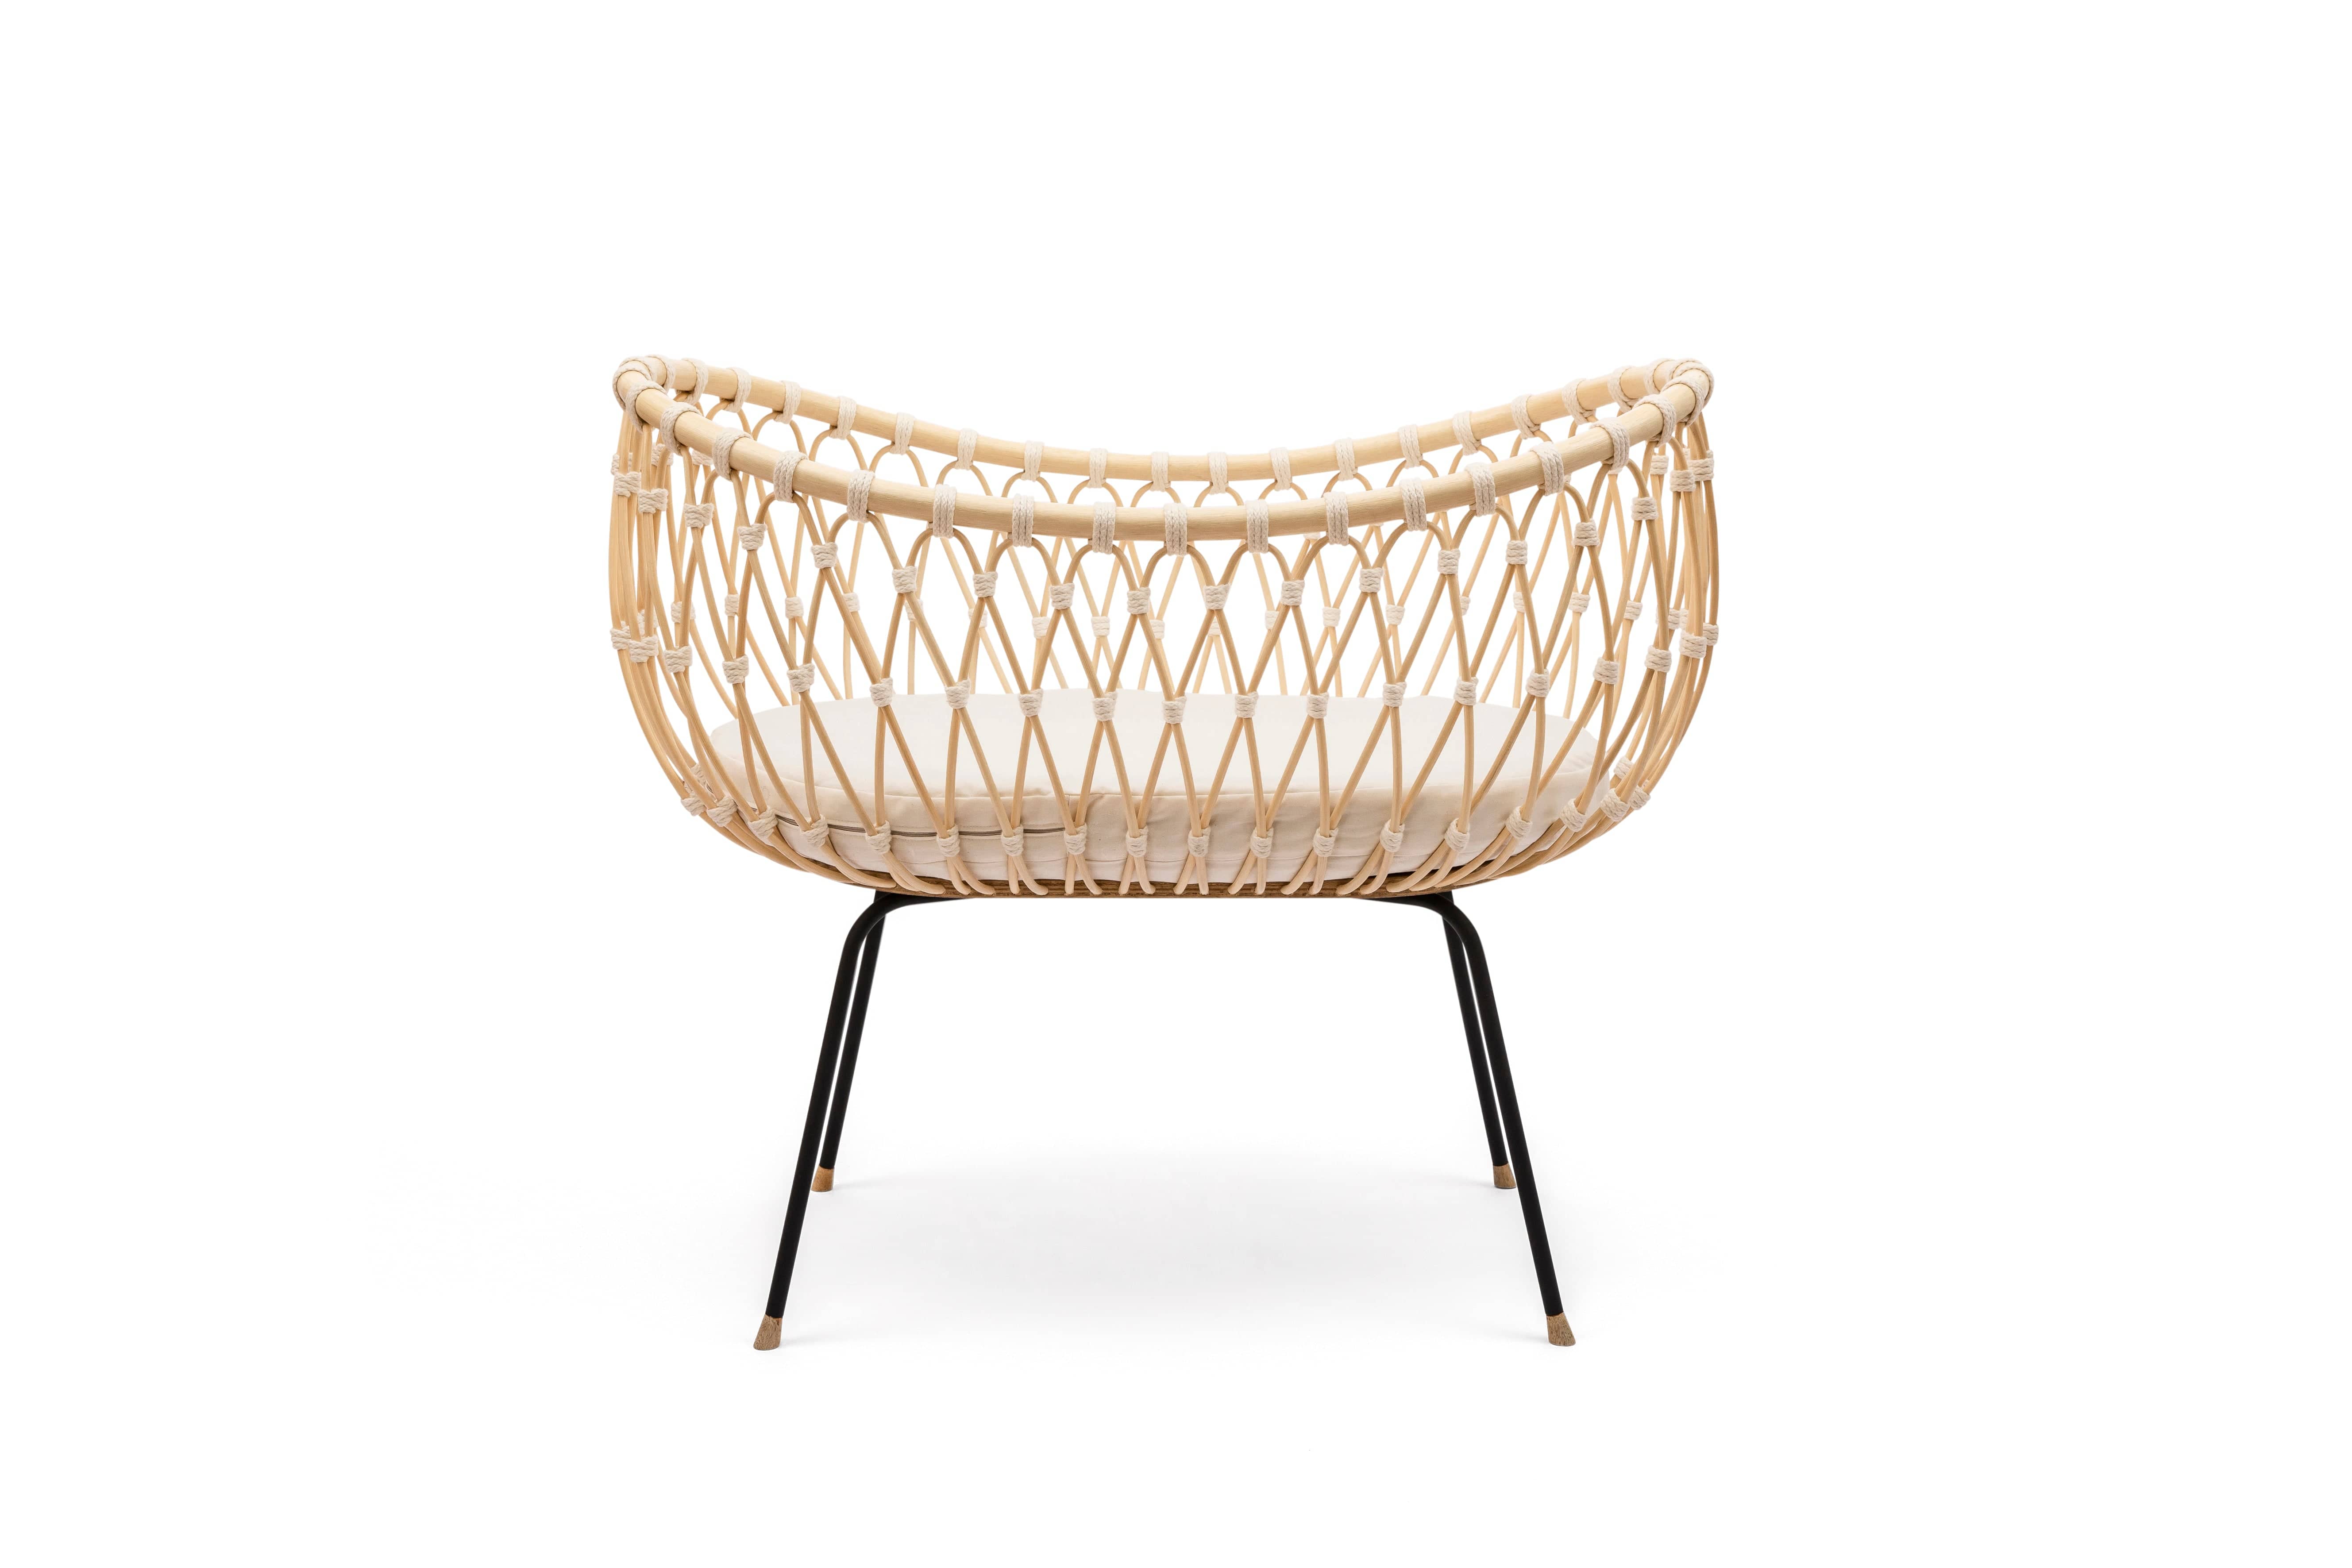 Round crib with outwards curved basket. Made of woven, light beige rattan beams, connected with off-white cotton strings and standing on slim black metal legs. 